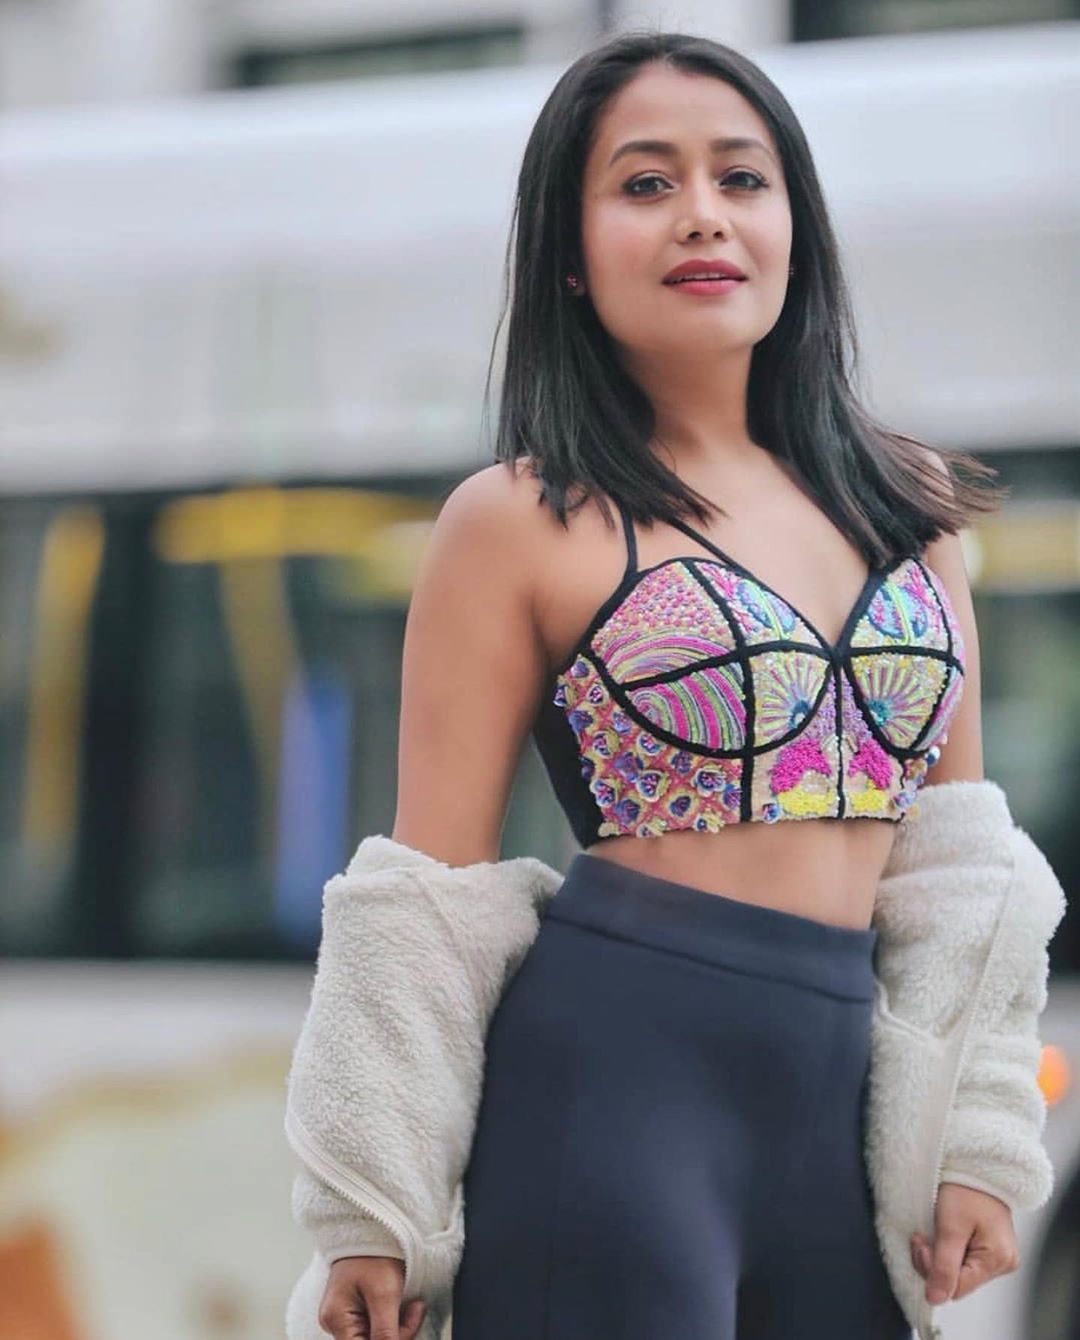 Image may contain: one or more people. Neha kakkar dresses, Neha kakkar, Neha kakkar pics